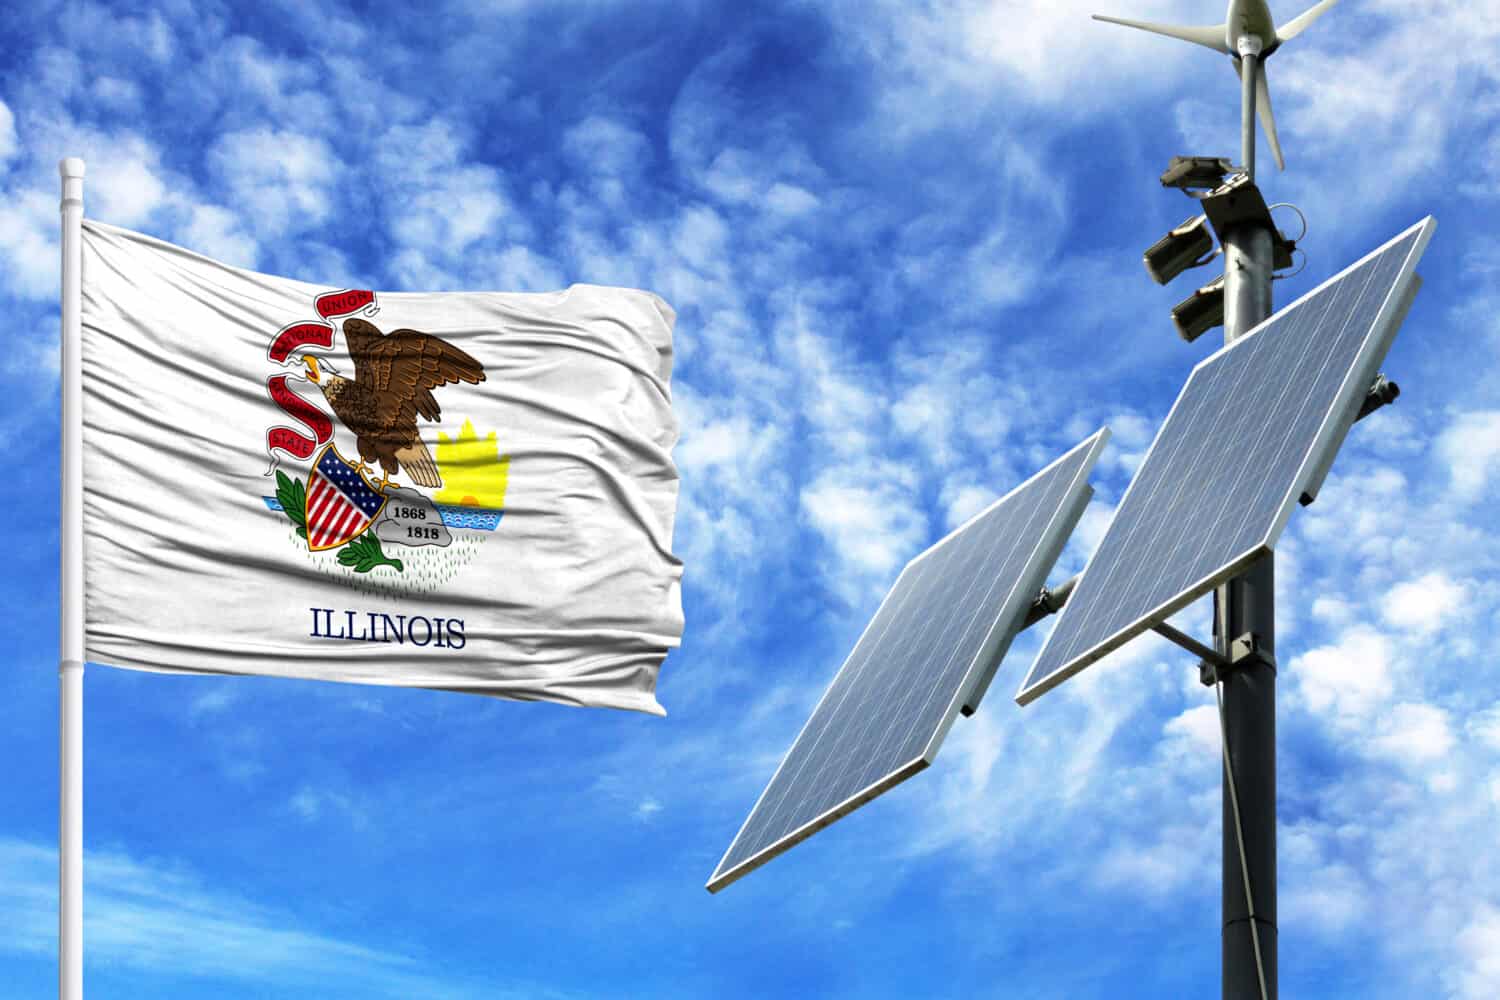 Solar panels on a background of blue sky with a flagpole and the flag State of Illinois